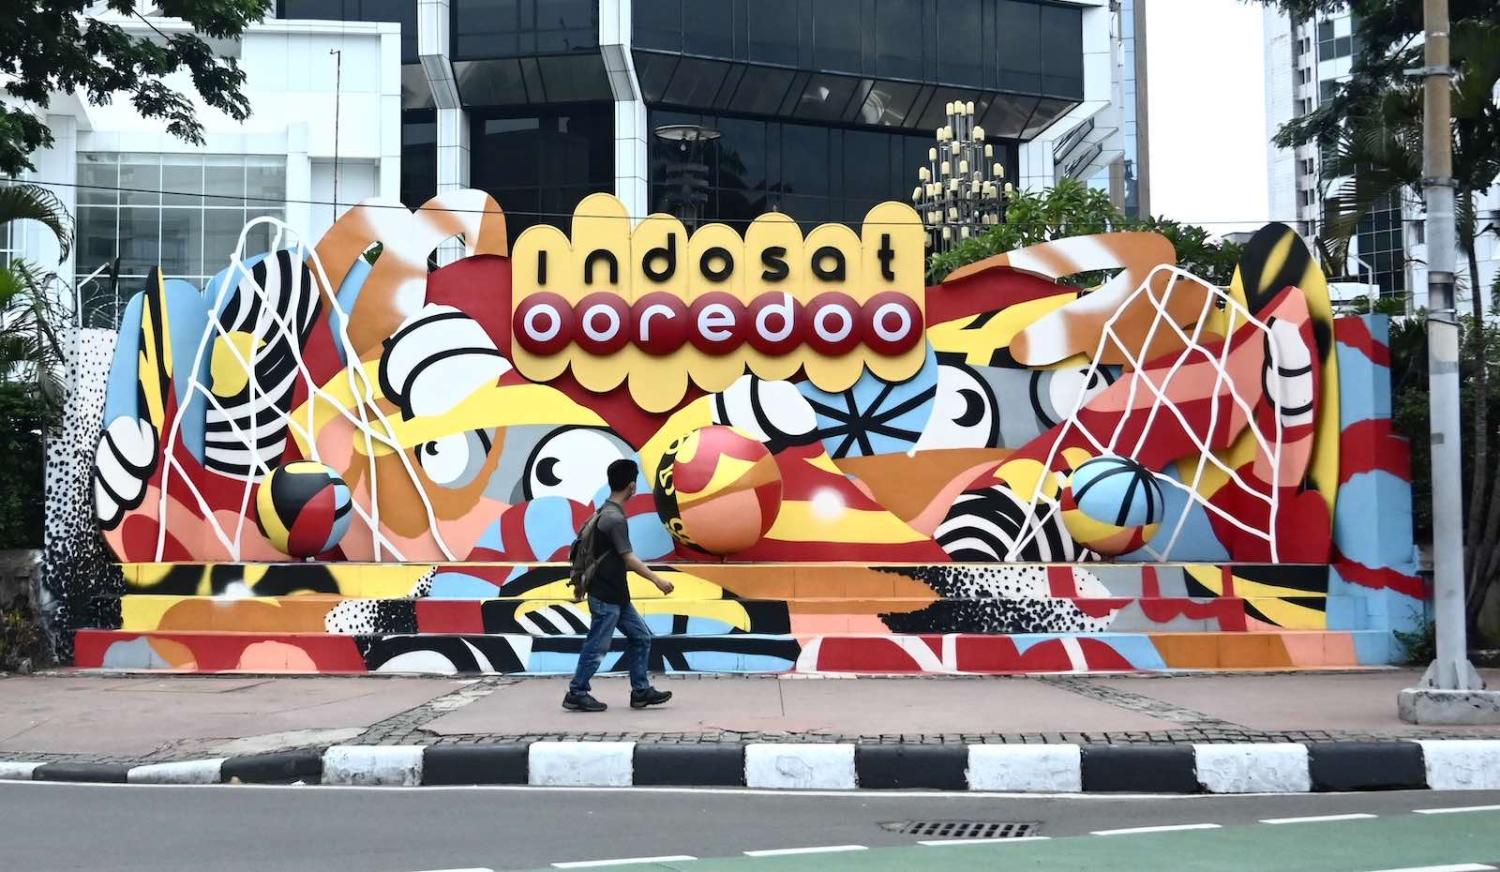 A billboard in Jakarta for Indosat Ooredoo, one of Indonesia’s largest telecoms providers (Goh Chai Hin/AFP via Getty Images)